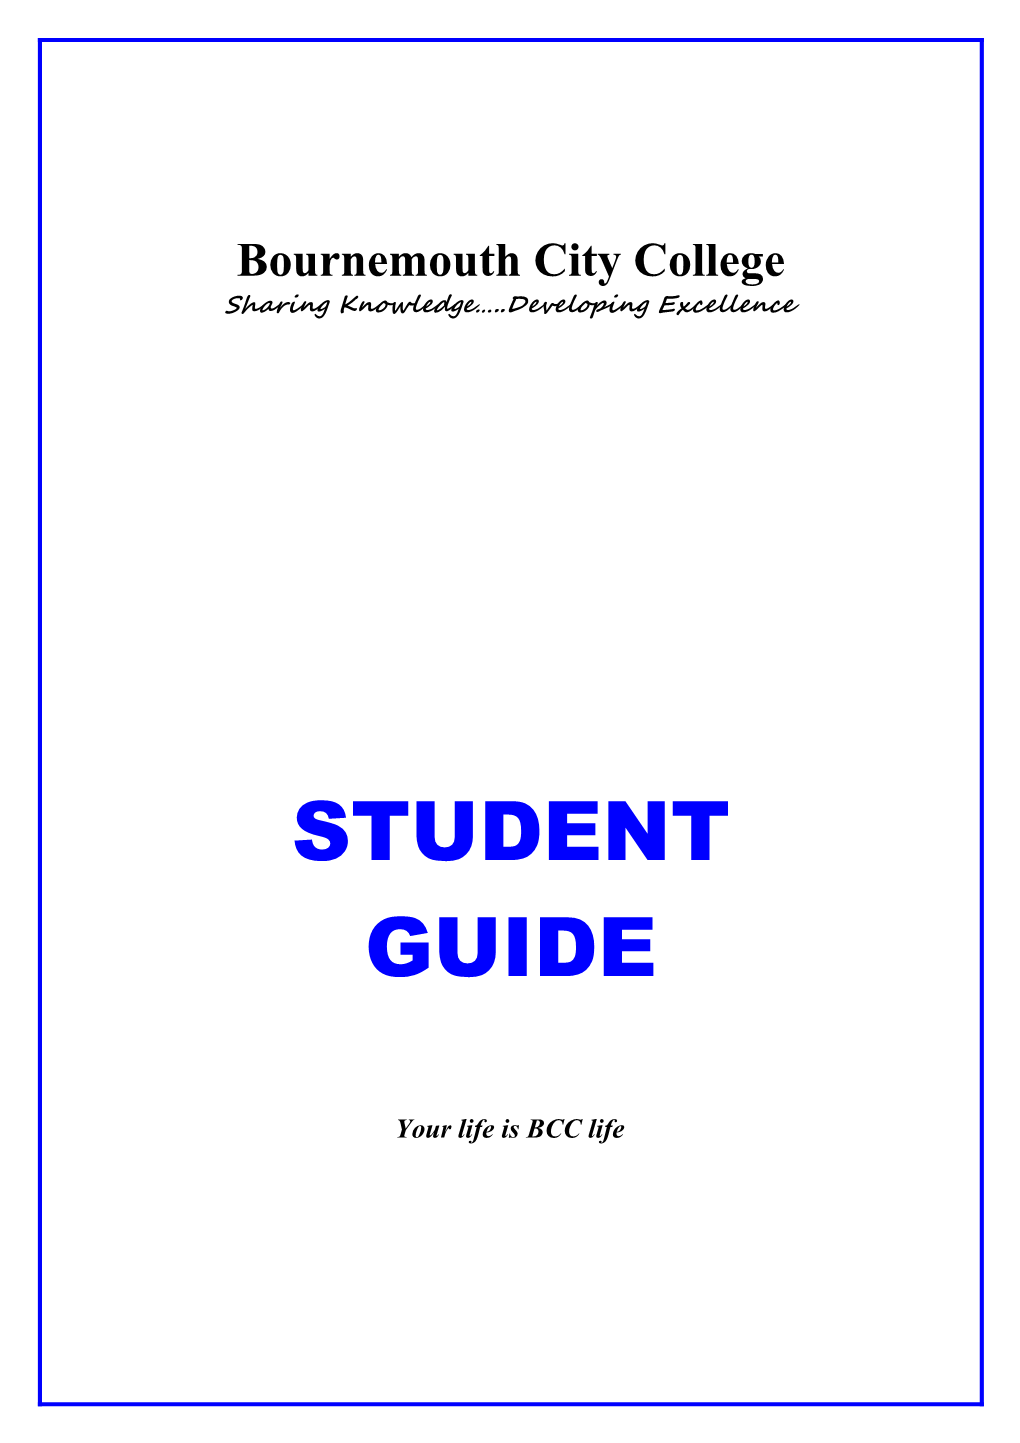 Student Guide 2010 Your Life Is BCC Life